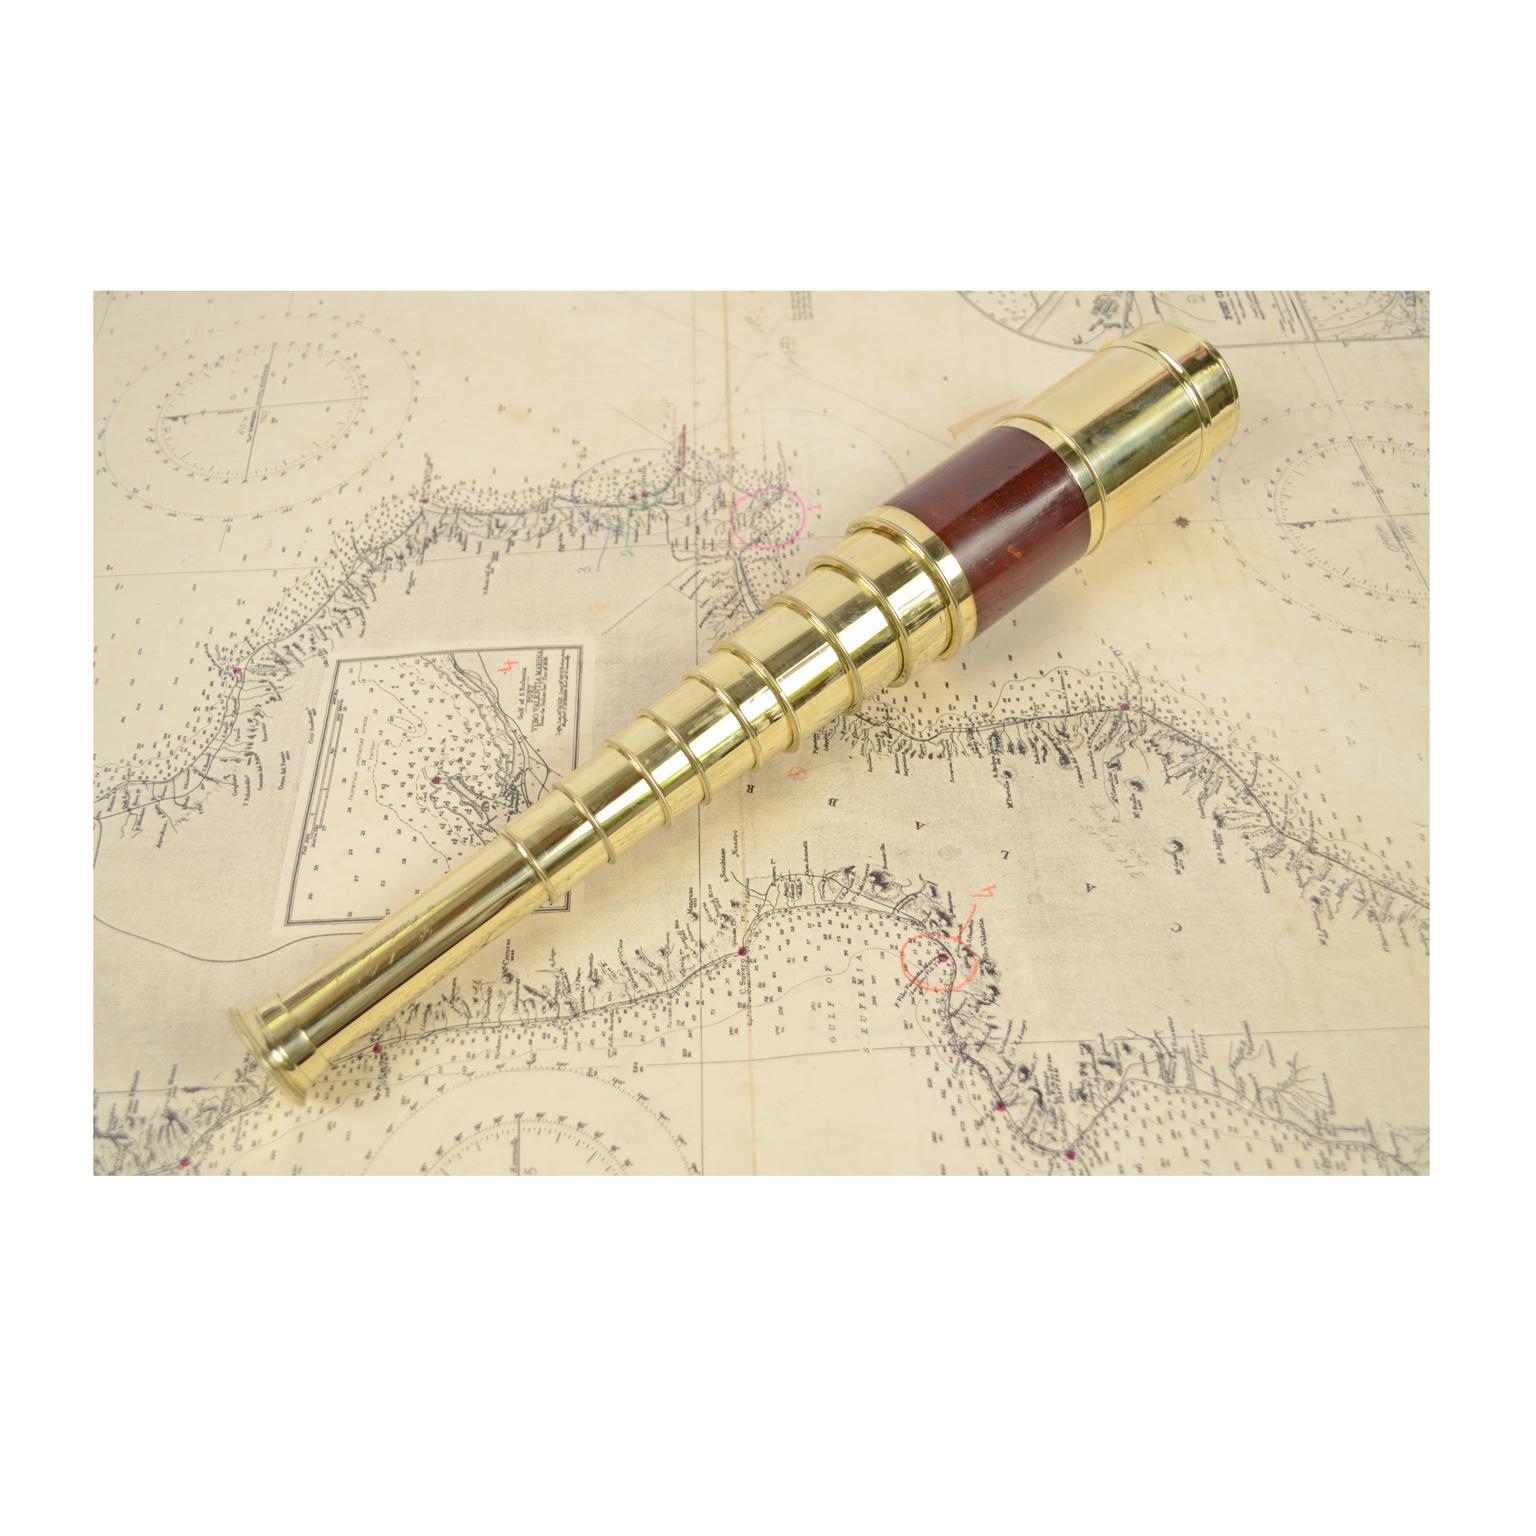 Brass and mahogany telescope with nine extensions, signed Bianchi Opticien à Toulouse et à Paris, mid-1800s. Maximum length 96.5 cm, minimum 17 cm, focal diameter 5 cm. Excellent condition fully functional, complete with base made to measure of wood